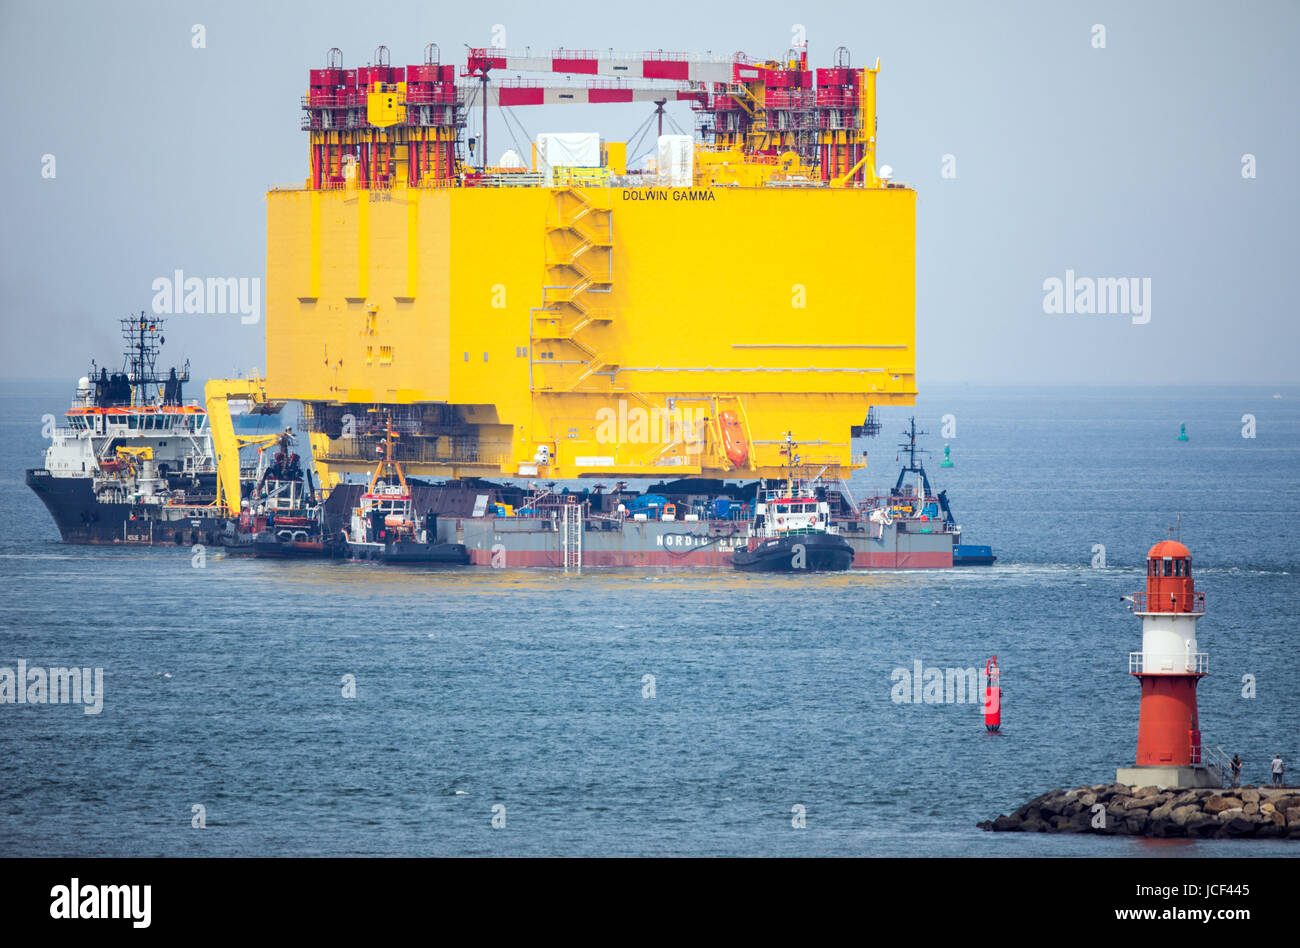 The large converter platform for the offshore wind plant 